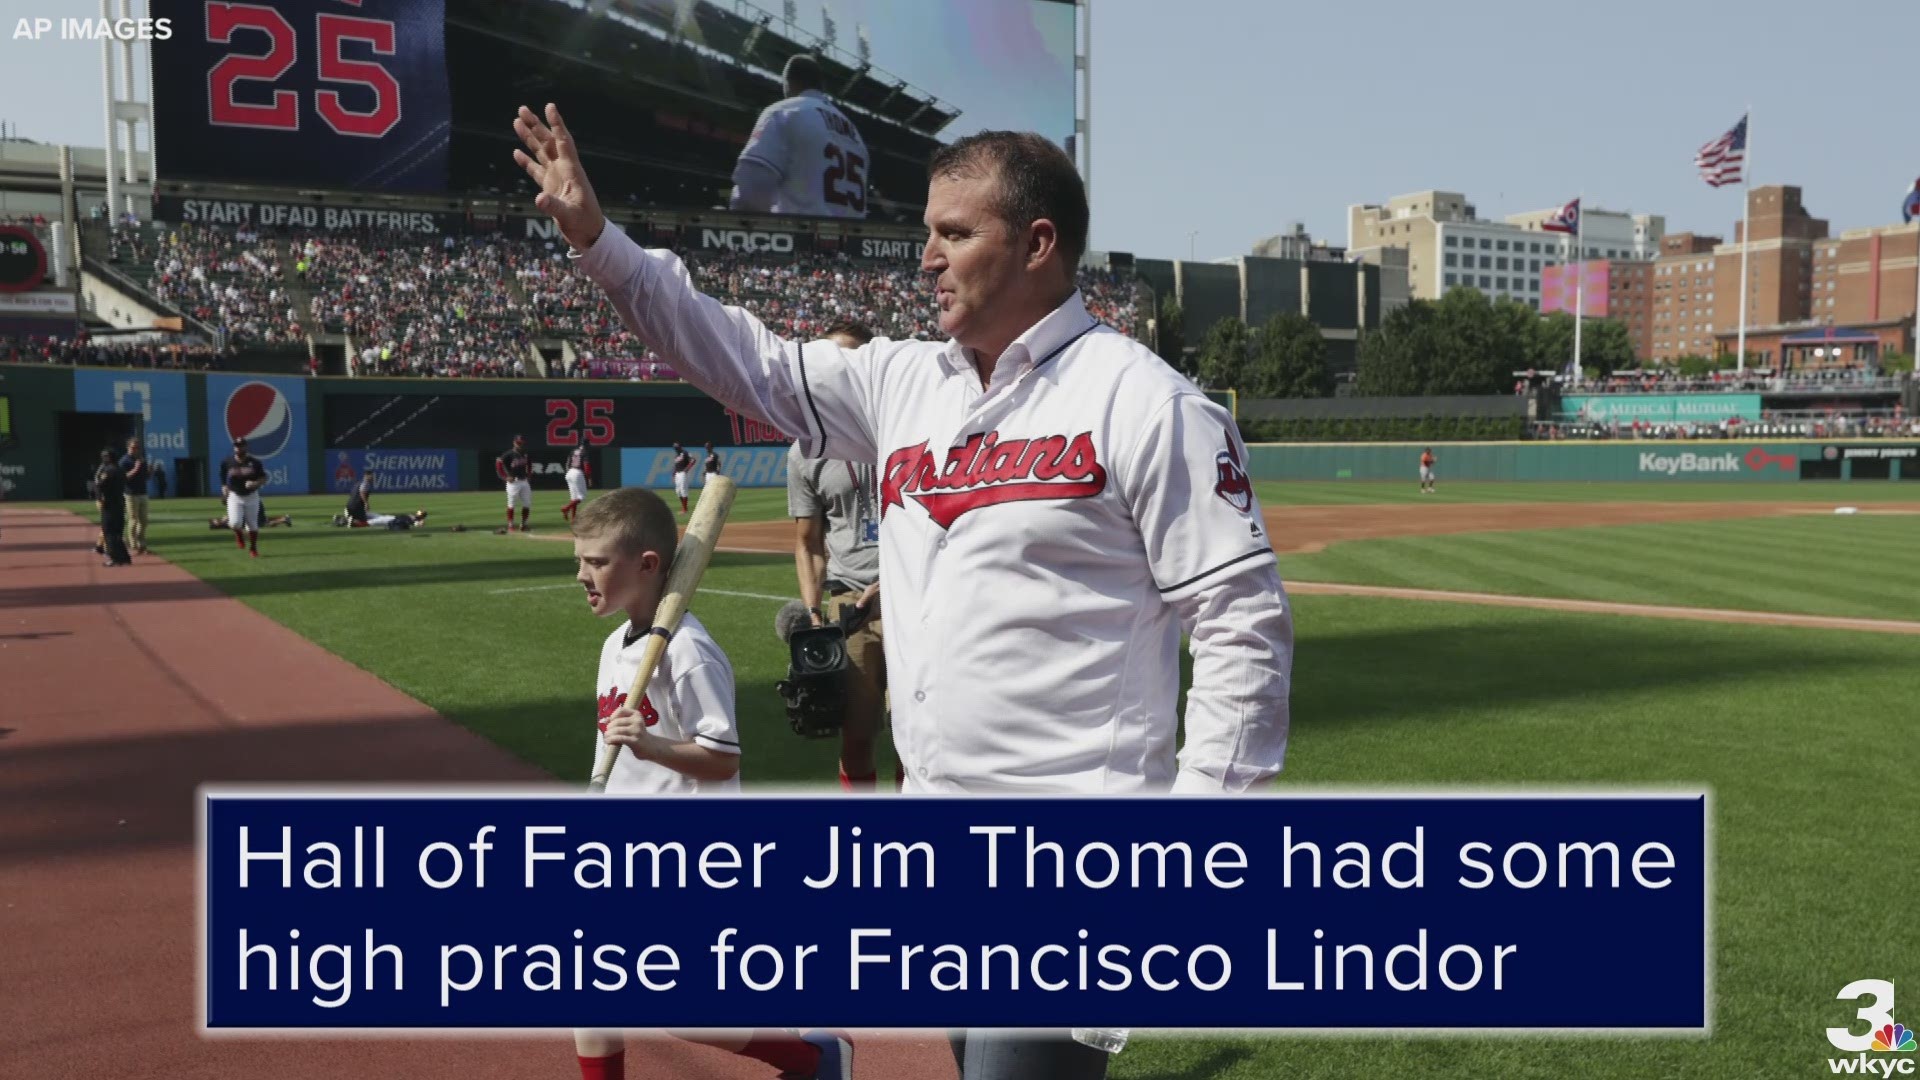 Hall of Famer Jim Thome coaching baseball at HS where his son plays